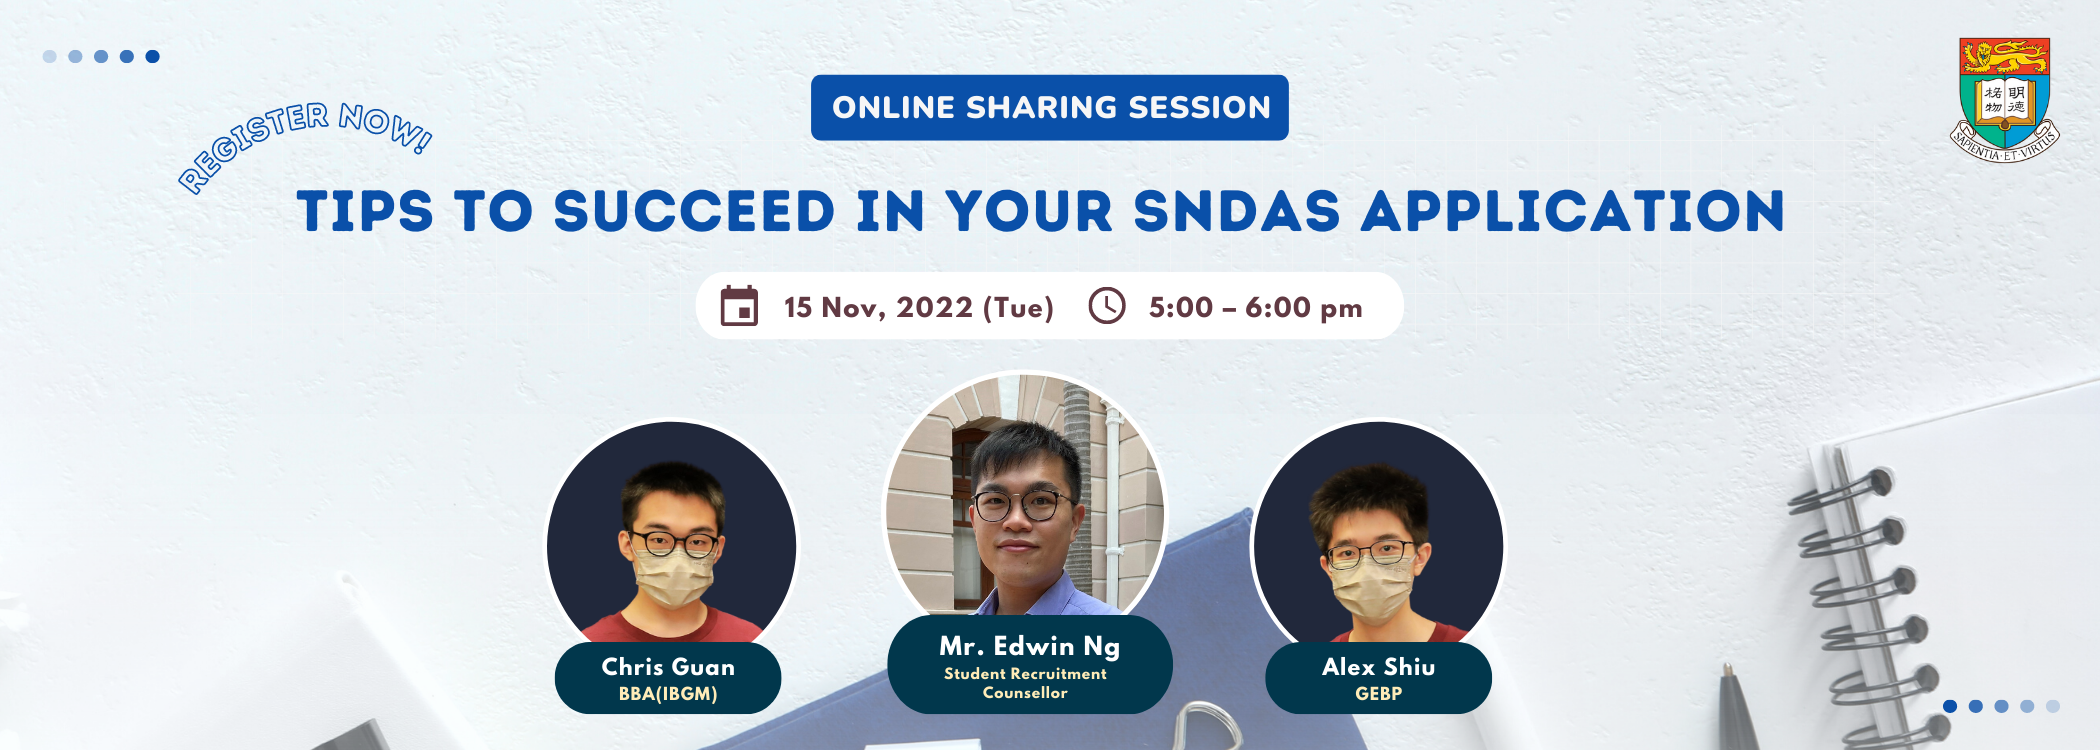 Banner for online sharing titled "Tips to Succeed in your SNDAS Application" on Nov 15, 2022